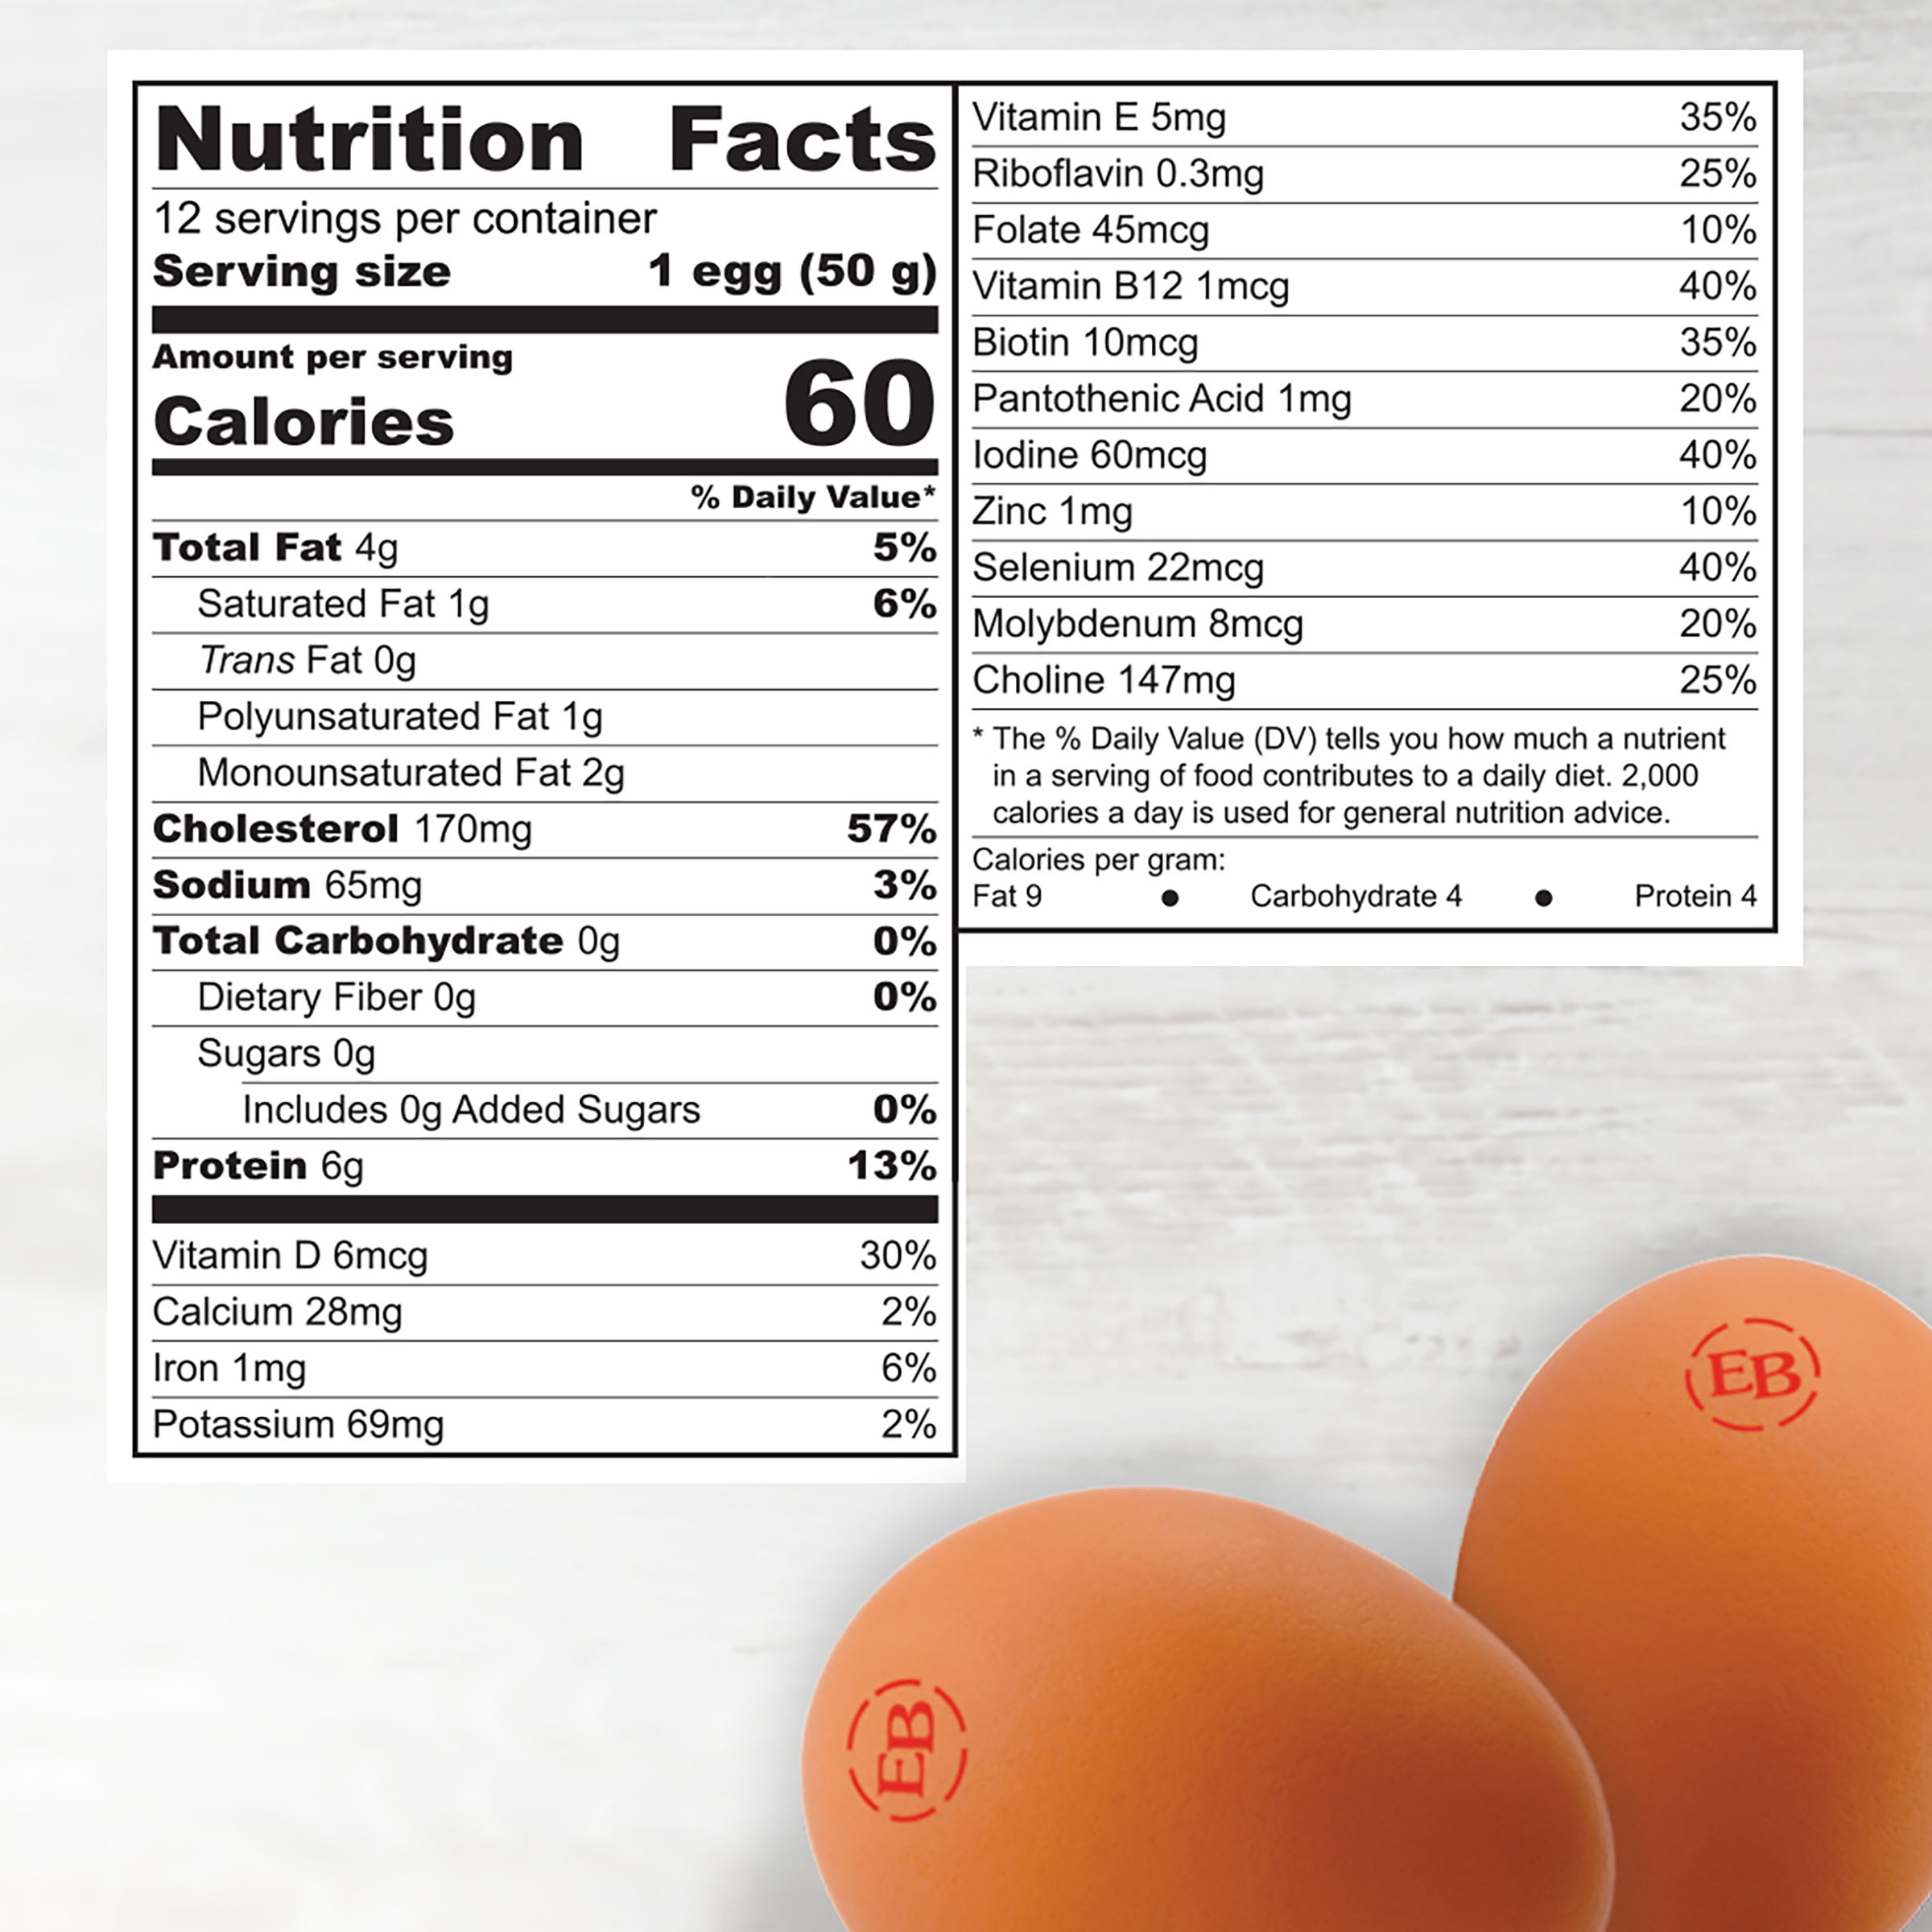 Eggland's Best 100% USDA Organic Certified Large Brown Eggs, 12 count - image 3 of 16